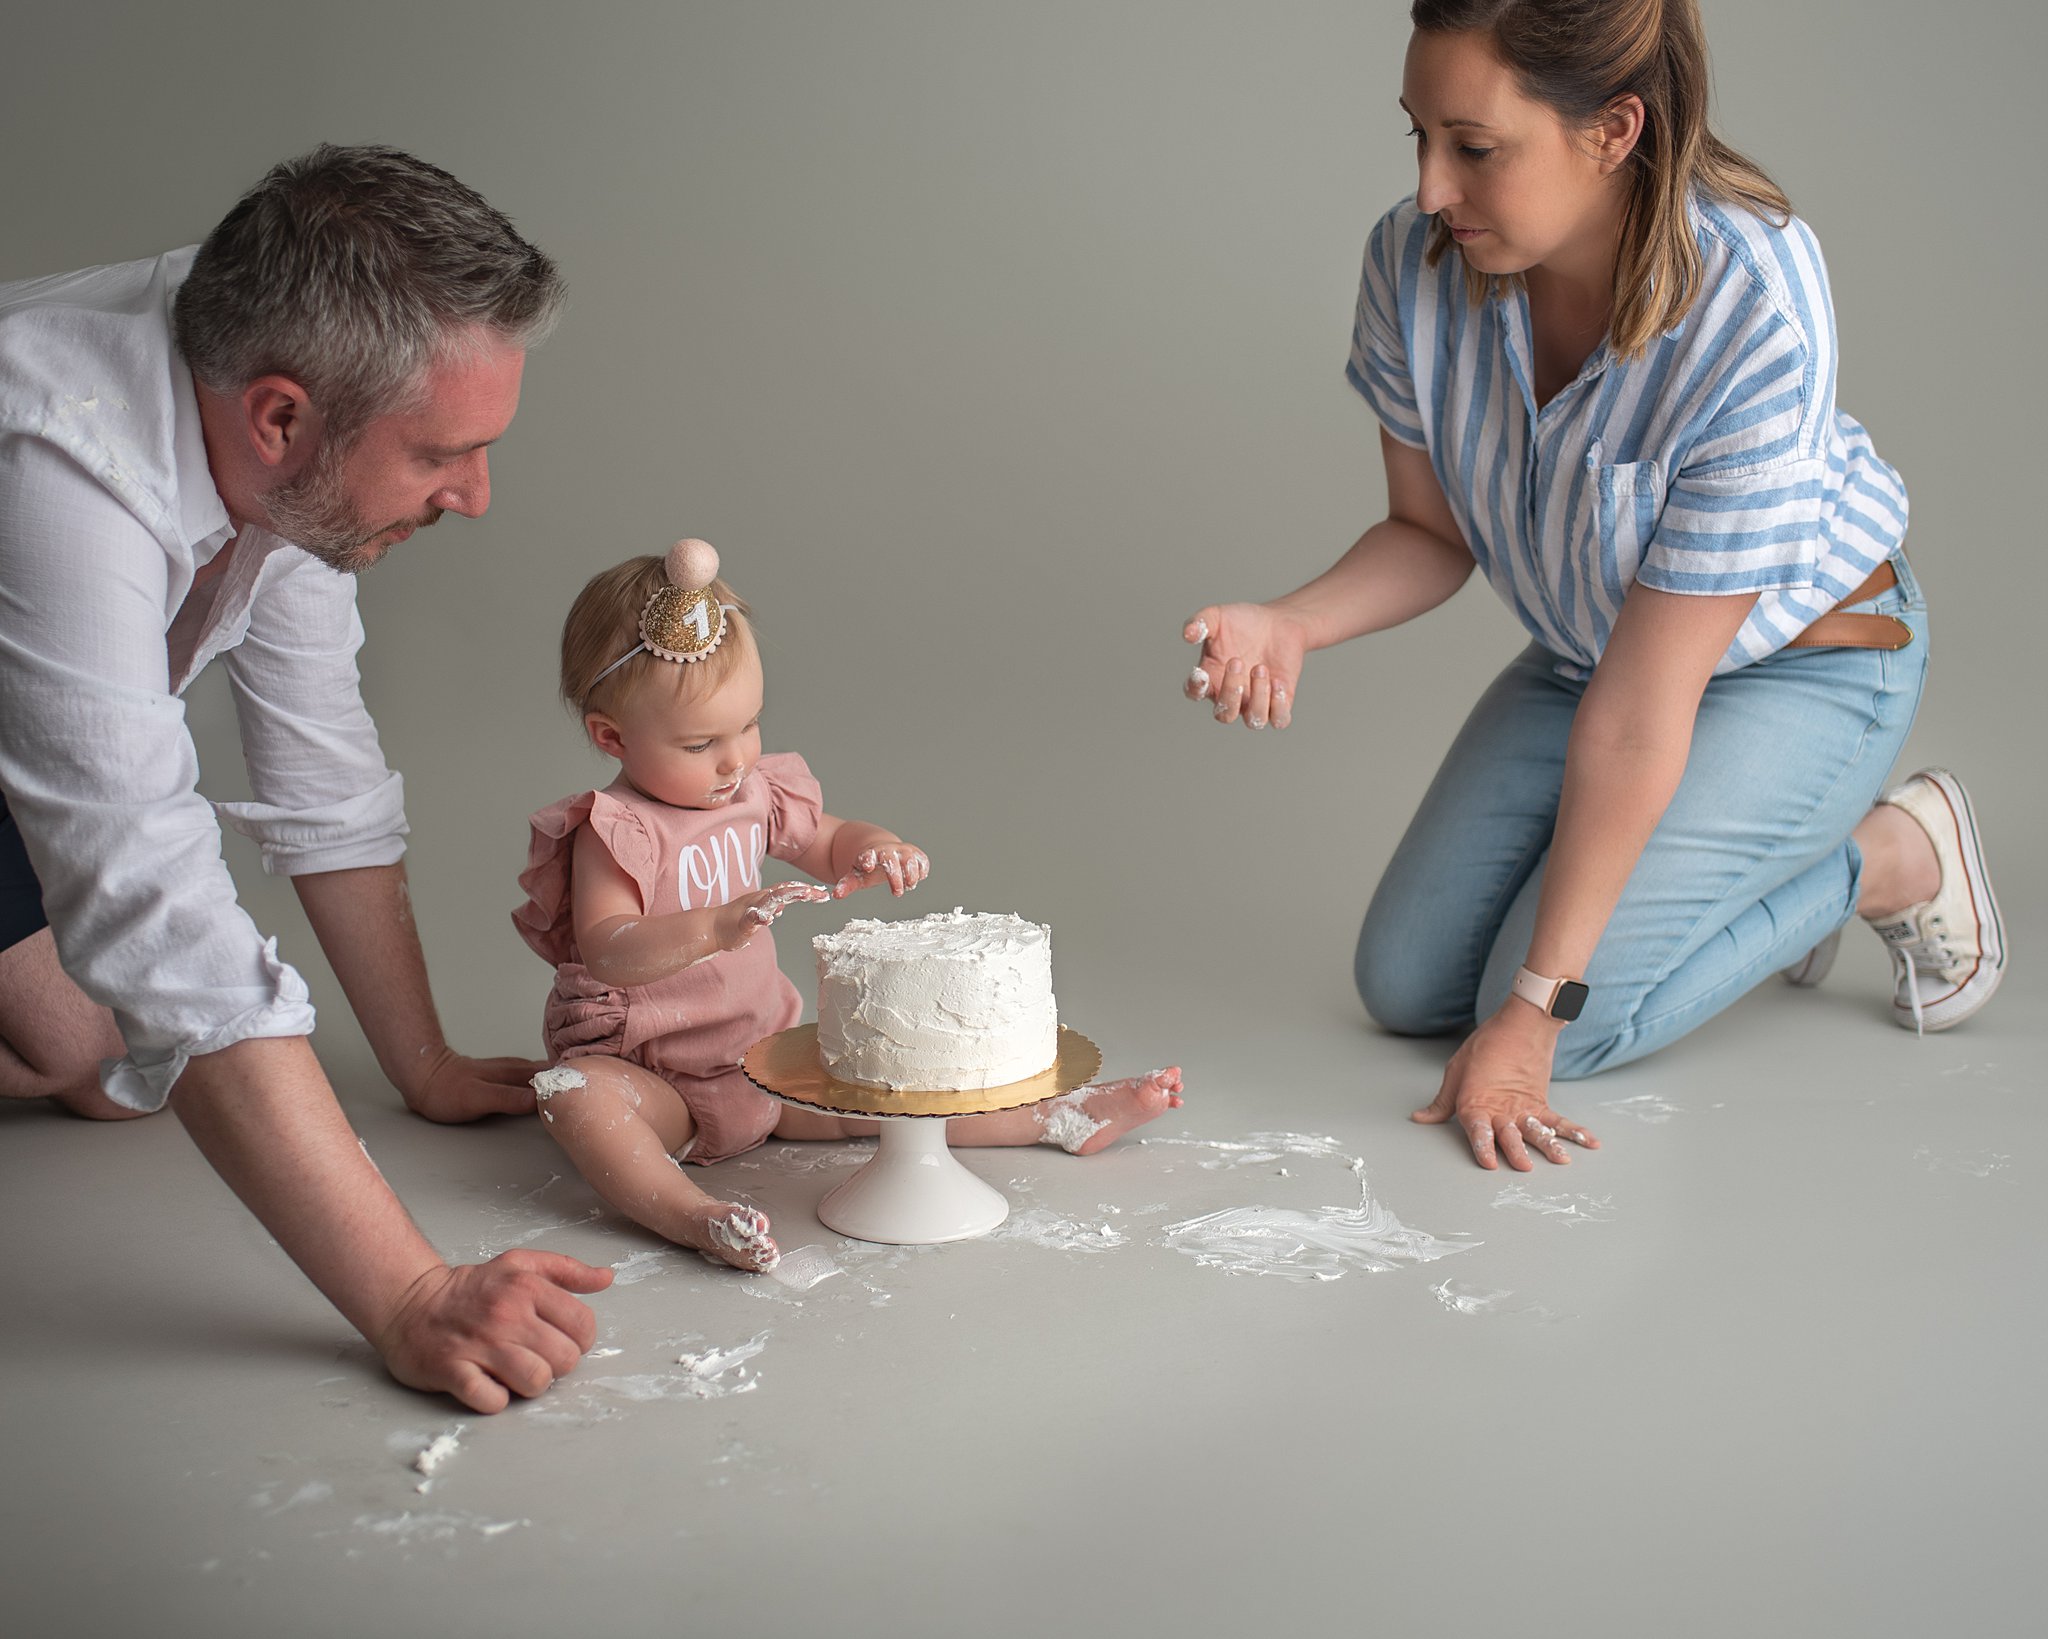 Mom and dad play with their one year old daughter on the floor of a studio as she plays in a white frosting birthday cake